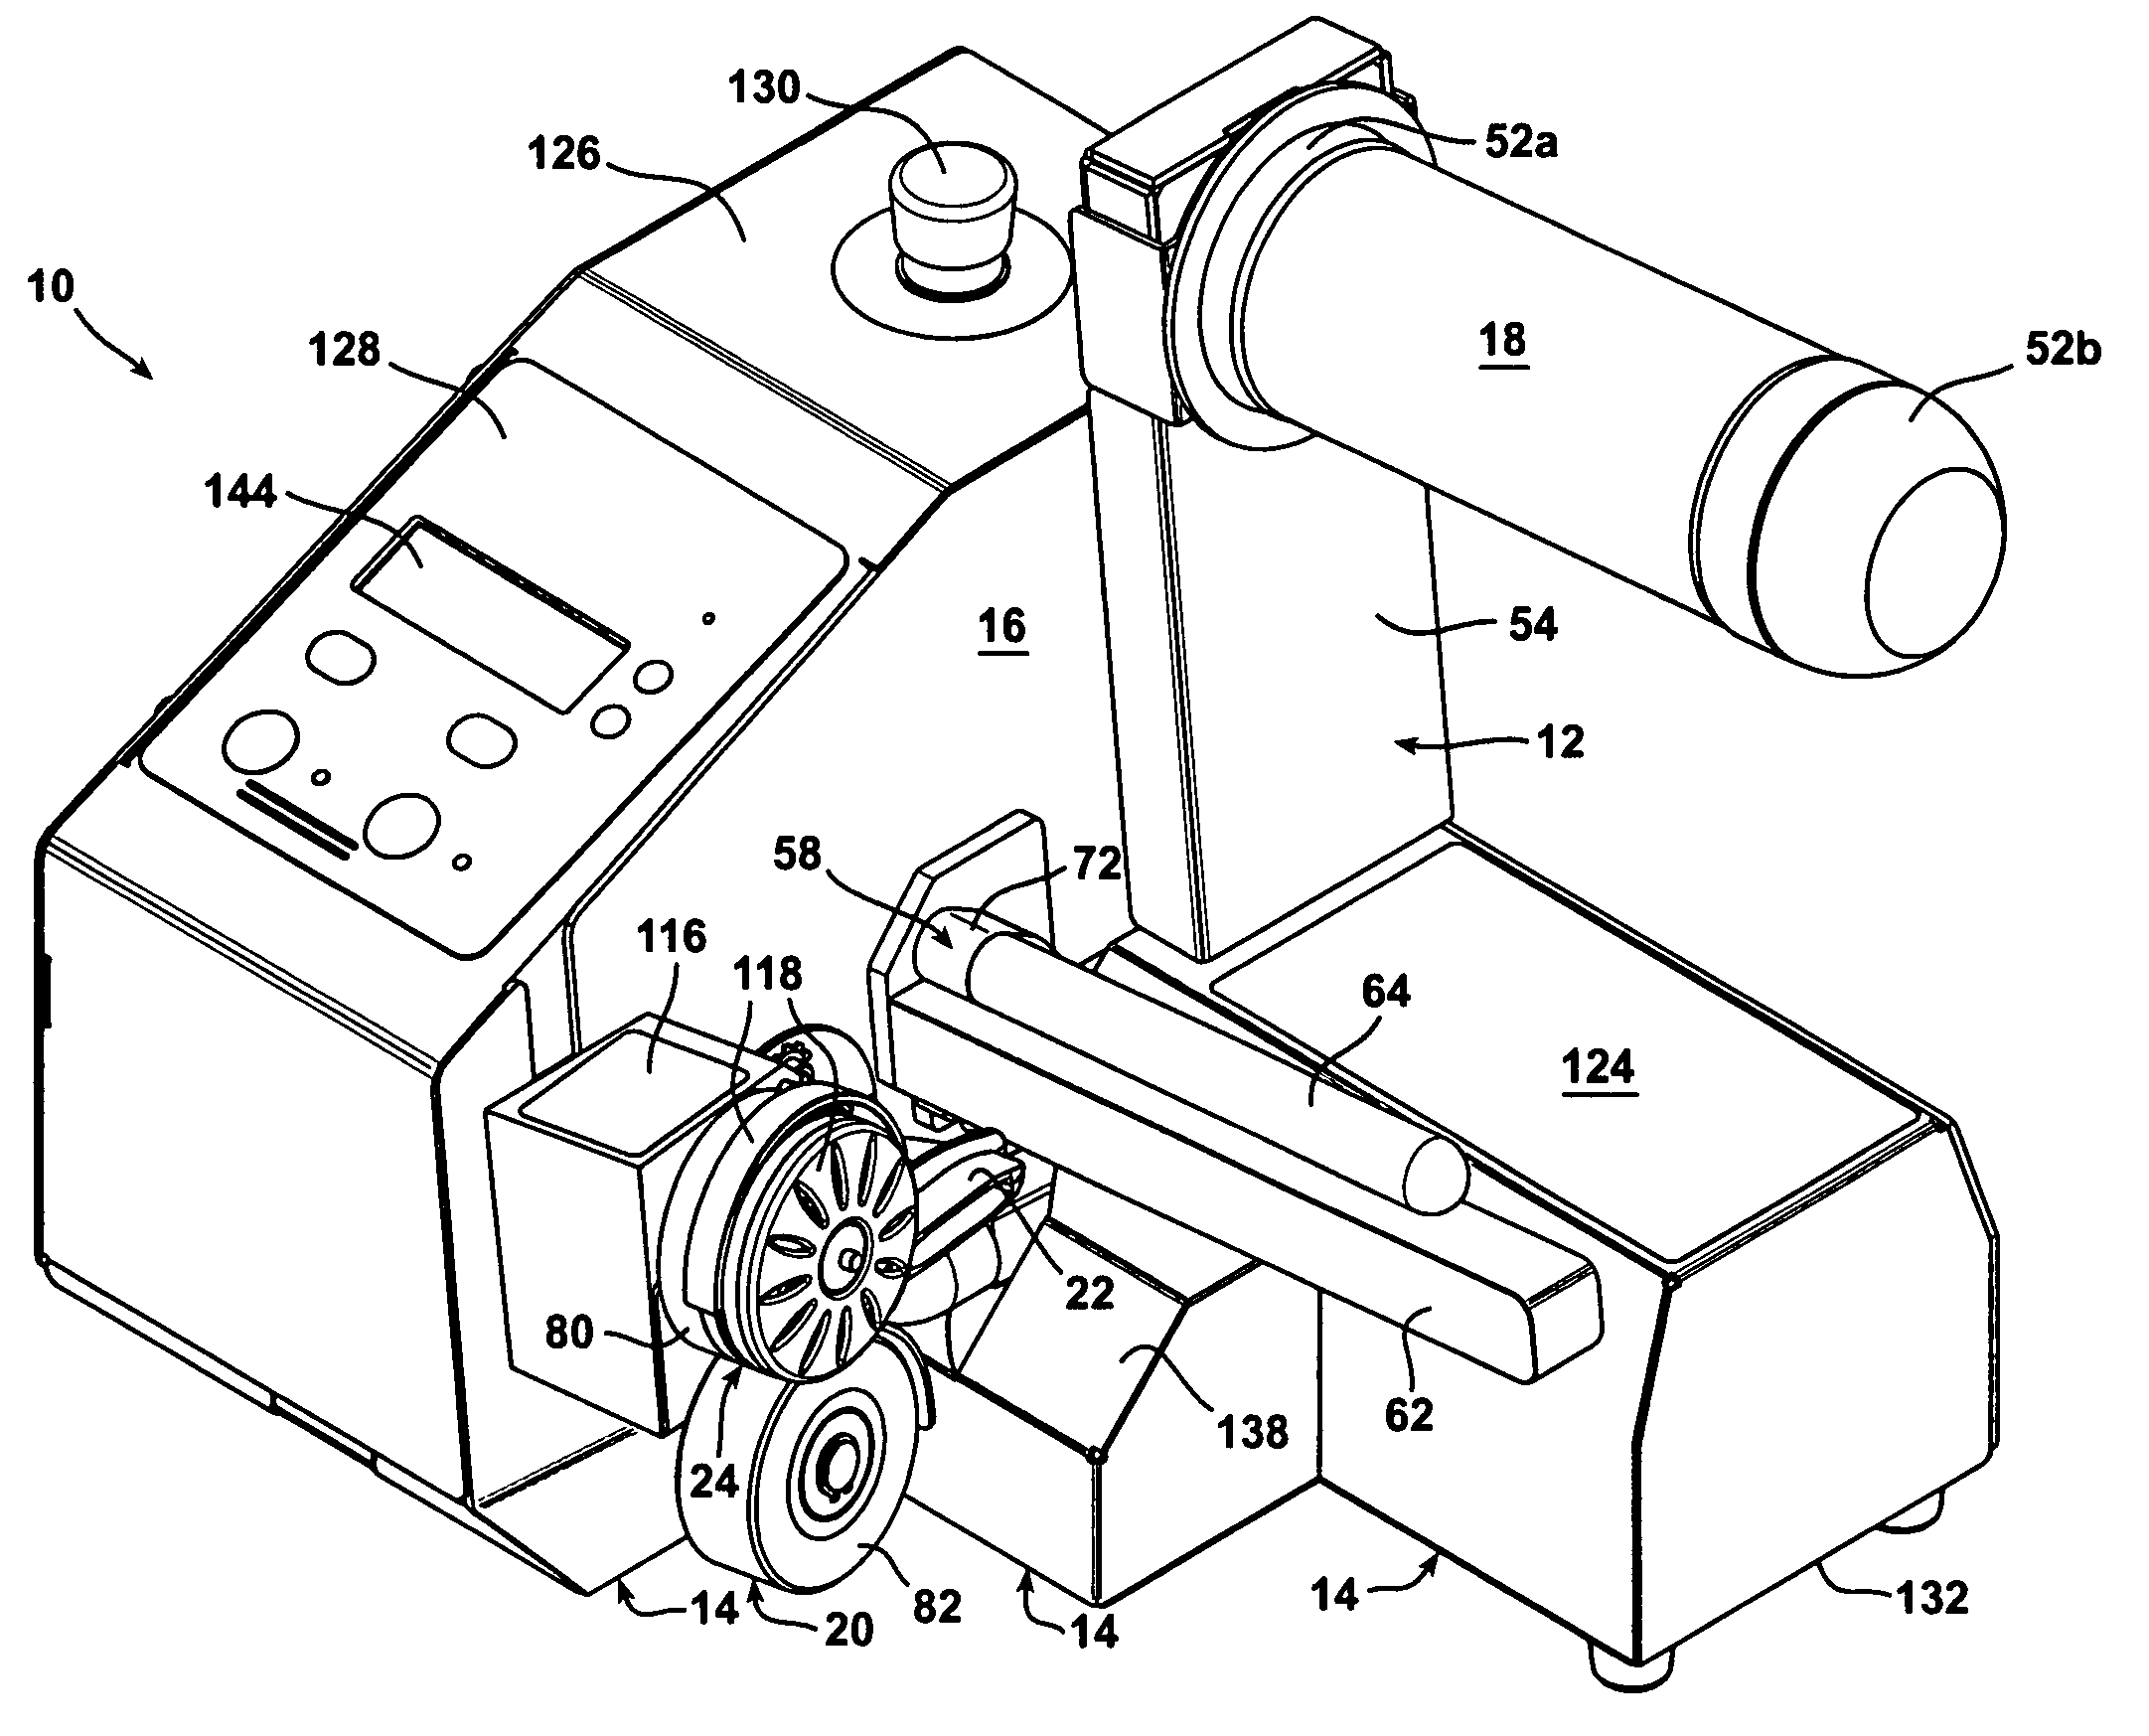 Machine for inflating and sealing an inflatable web